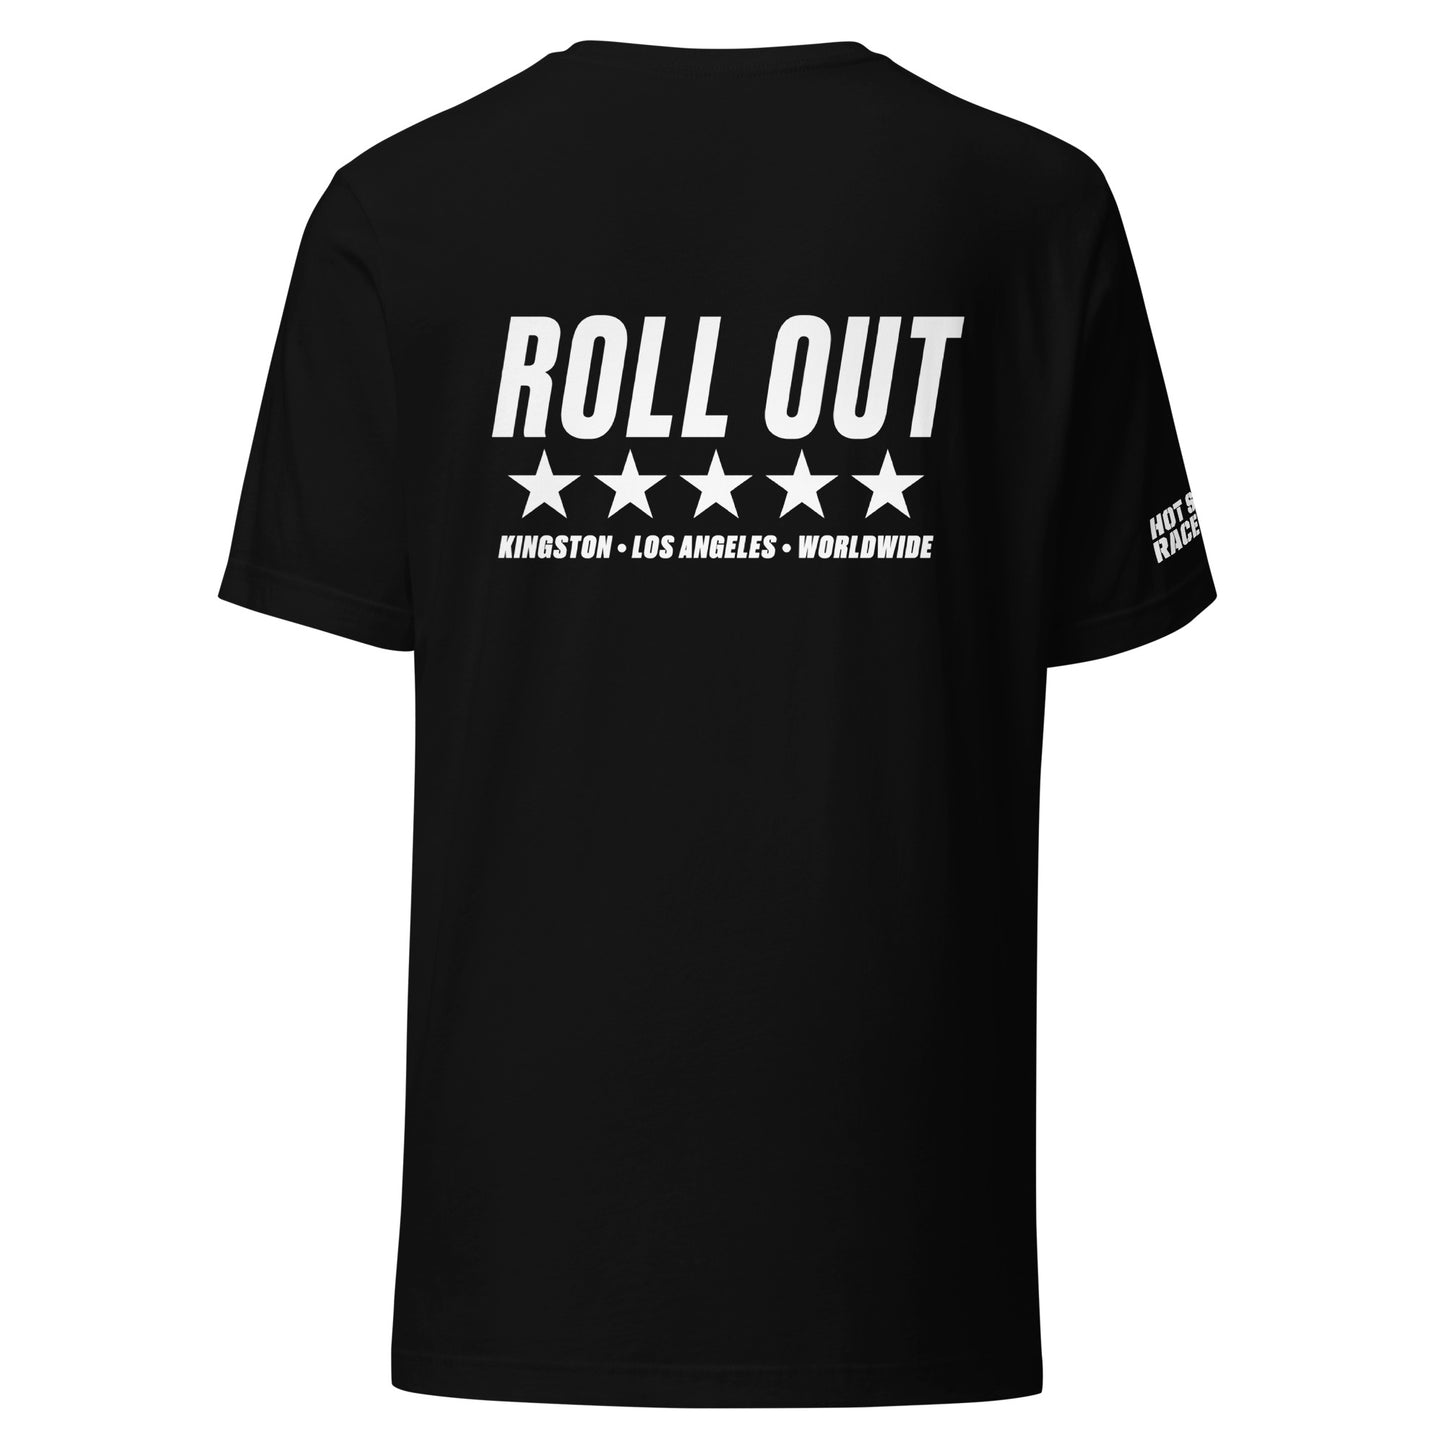 Roll Out Racer Tee - Black / White